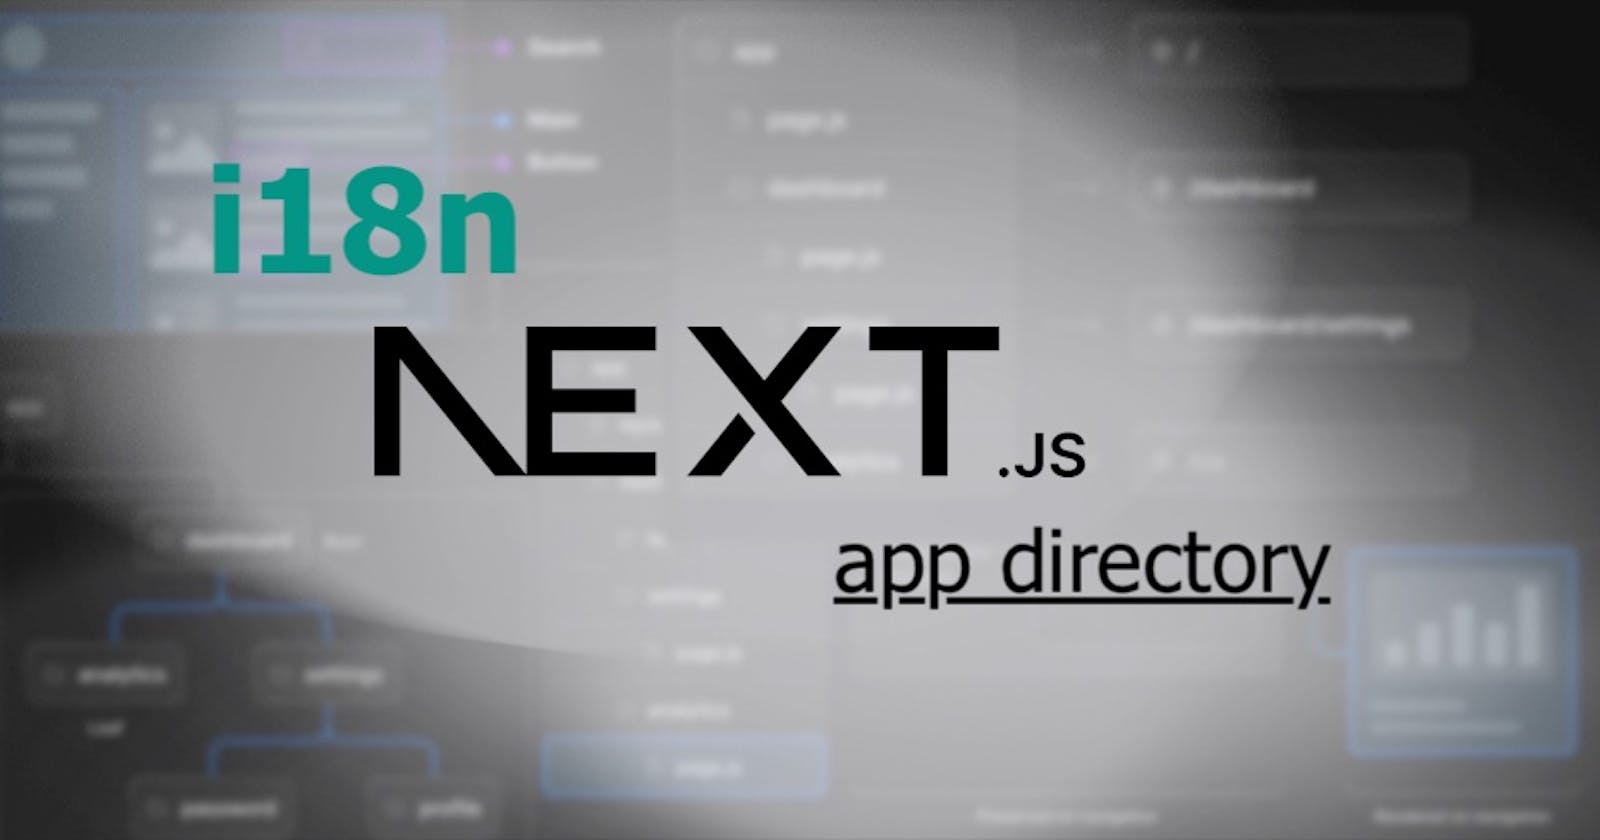 i18n with Next.js 13 and app directory